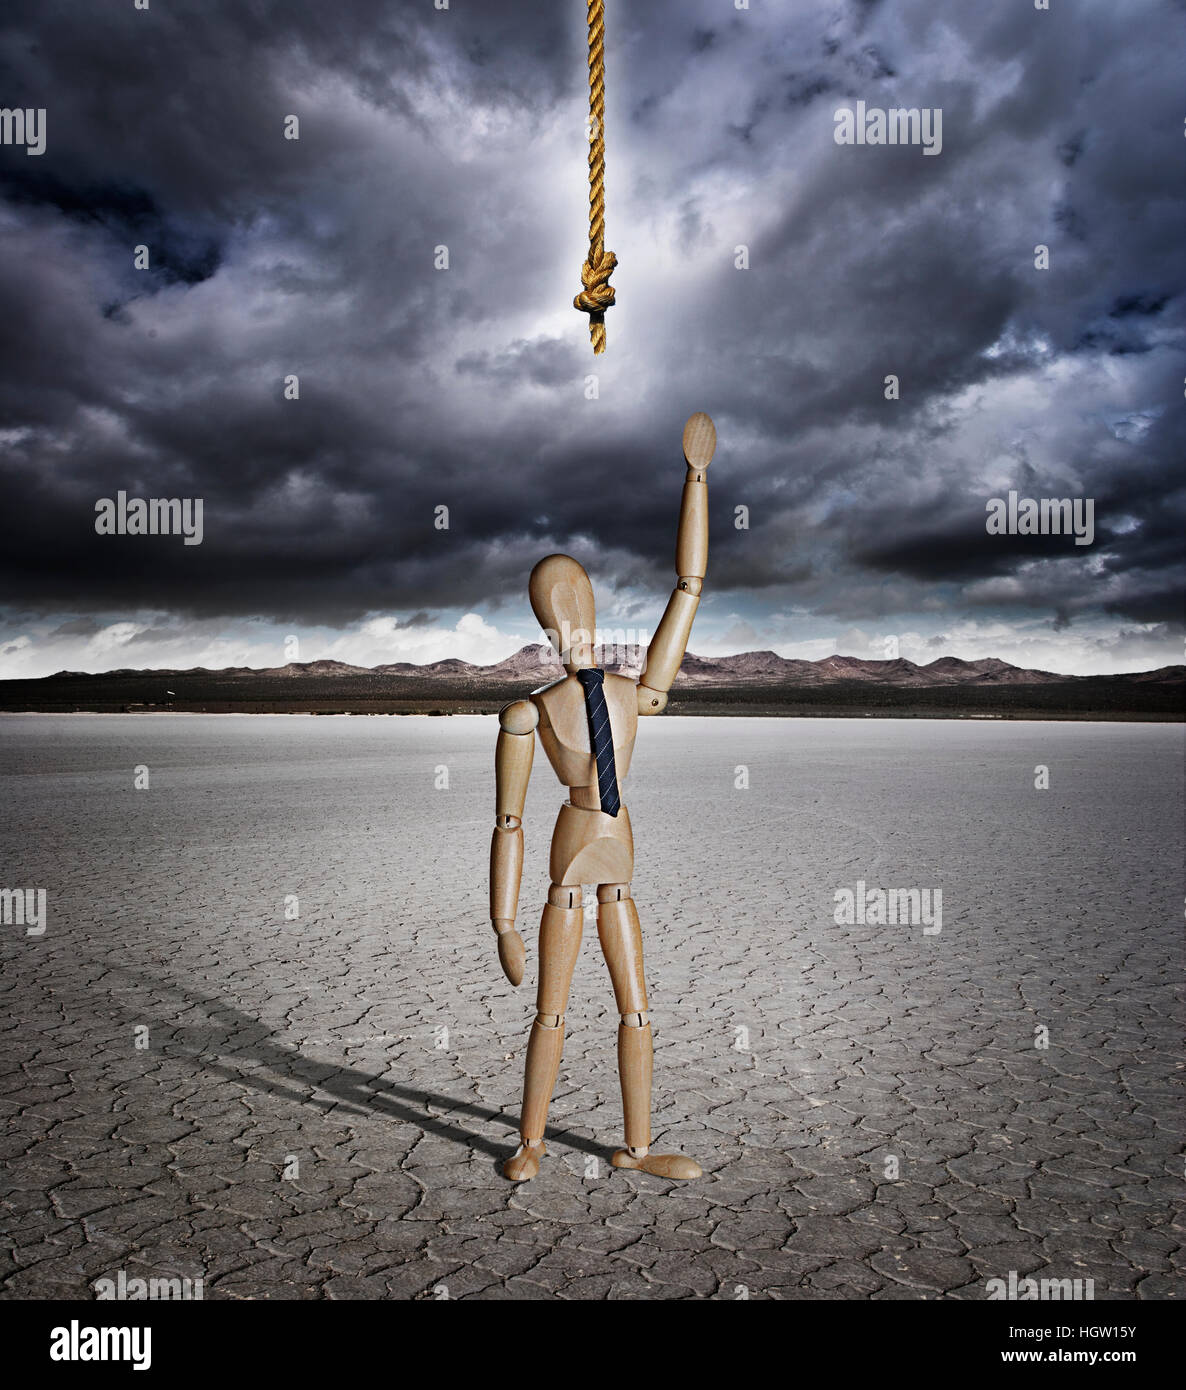 Artist Manikin Reaching For A Rope In A Dry Lake Bed With Storm Clouds Stock Photo